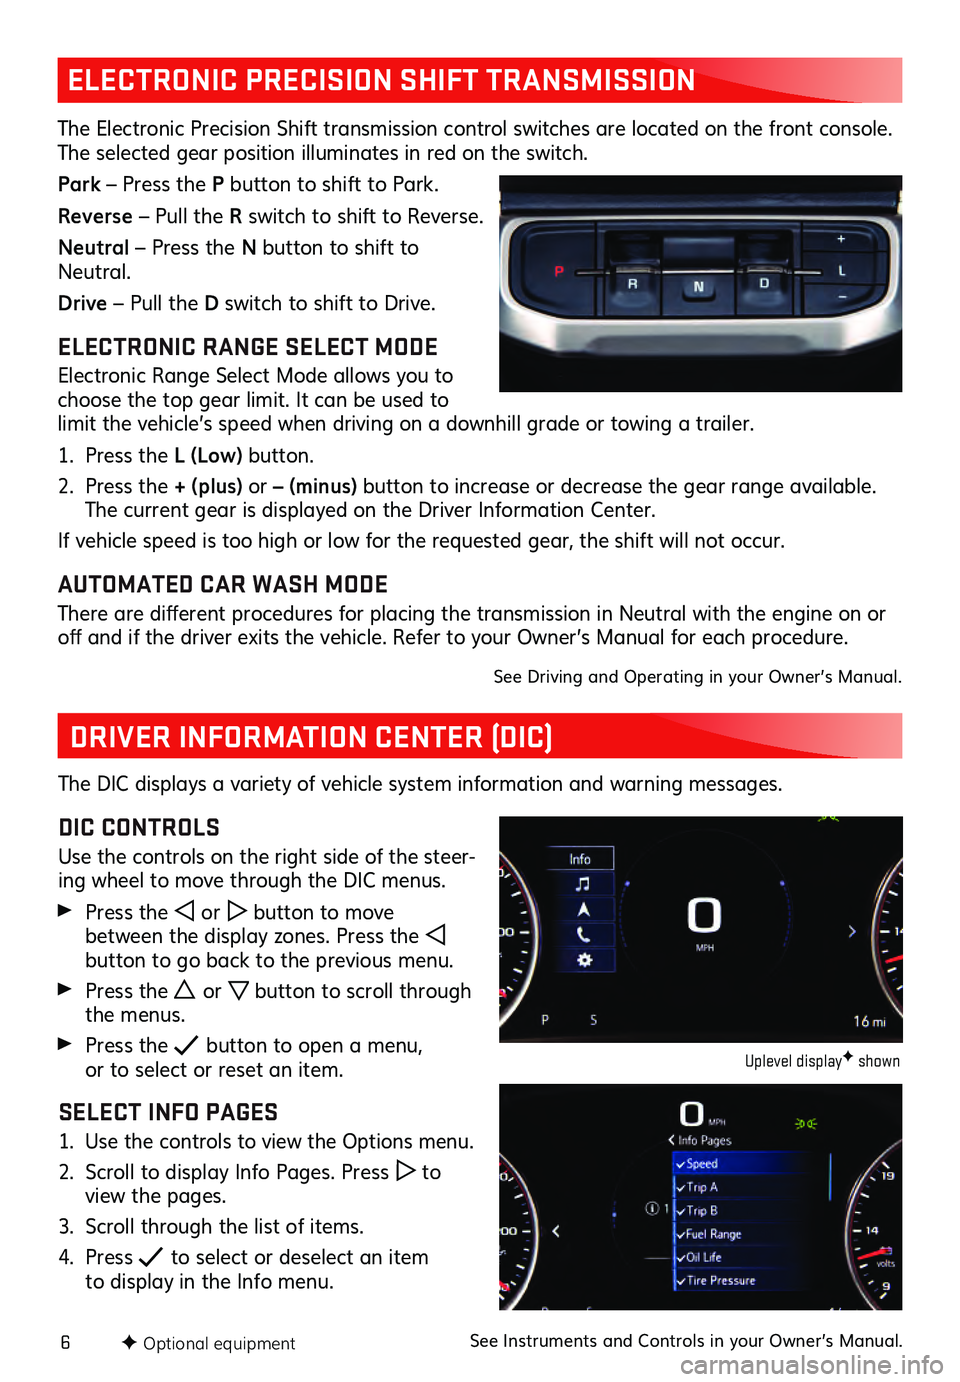 GMC ACADIA 2021  Get To Know Guide 6F Optional equipment
ELECTRONIC PRECISION SHIFT TRANSMISSION 
The Electronic Precision Shift transmission  control switches are located on the front   c onsole. The selected gear position illuminates